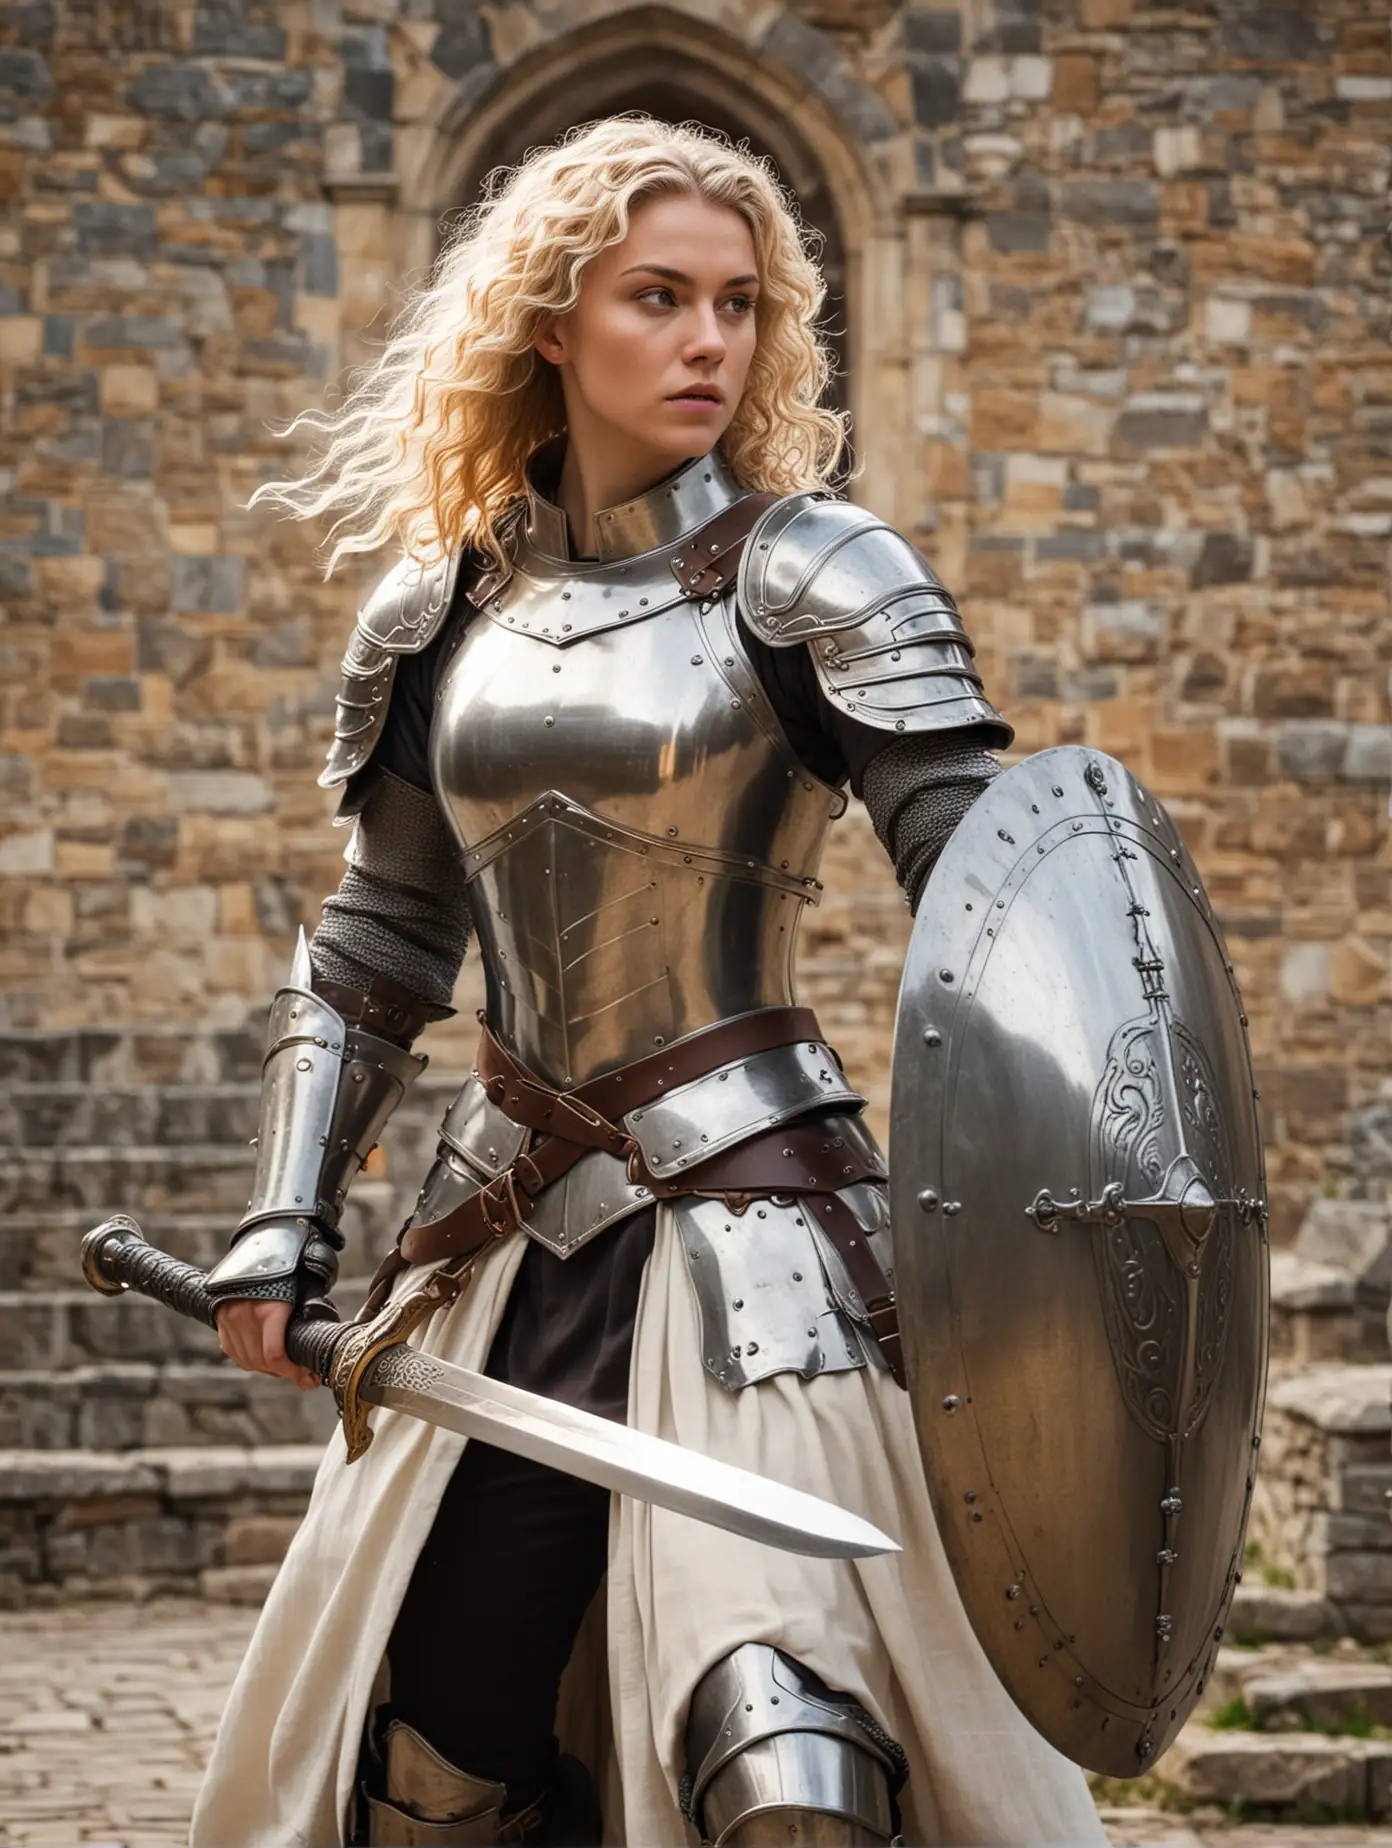 Blonde ringlets human female paladin looking intense in a fighting stance with longsword and heavy shield at a castle